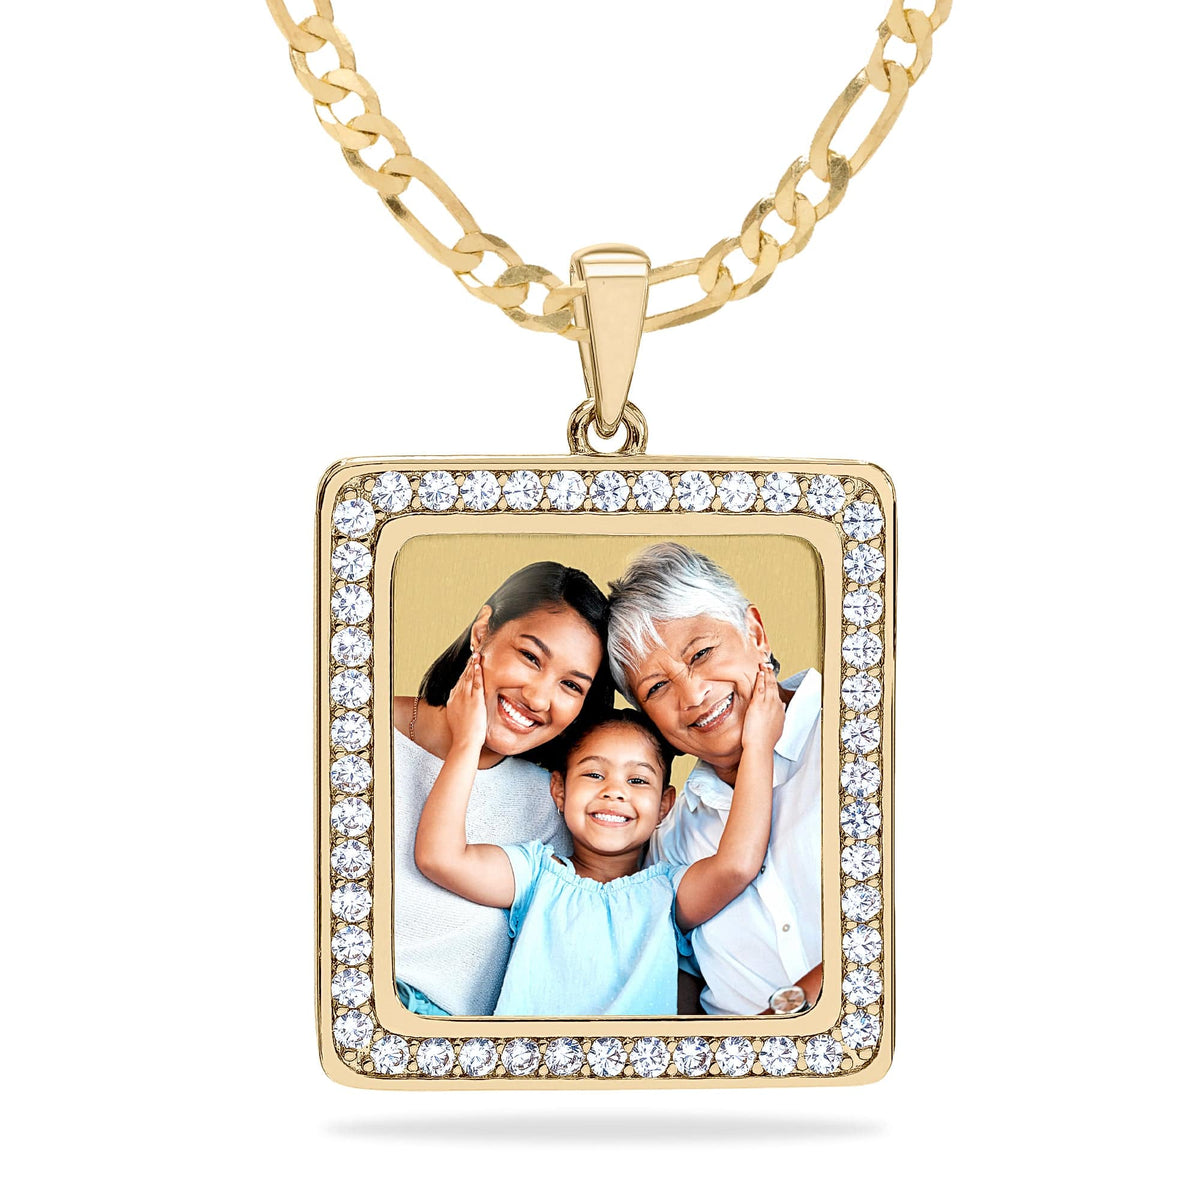 Gold Plated / Figaro Chain Square Photo Pendant with Stones